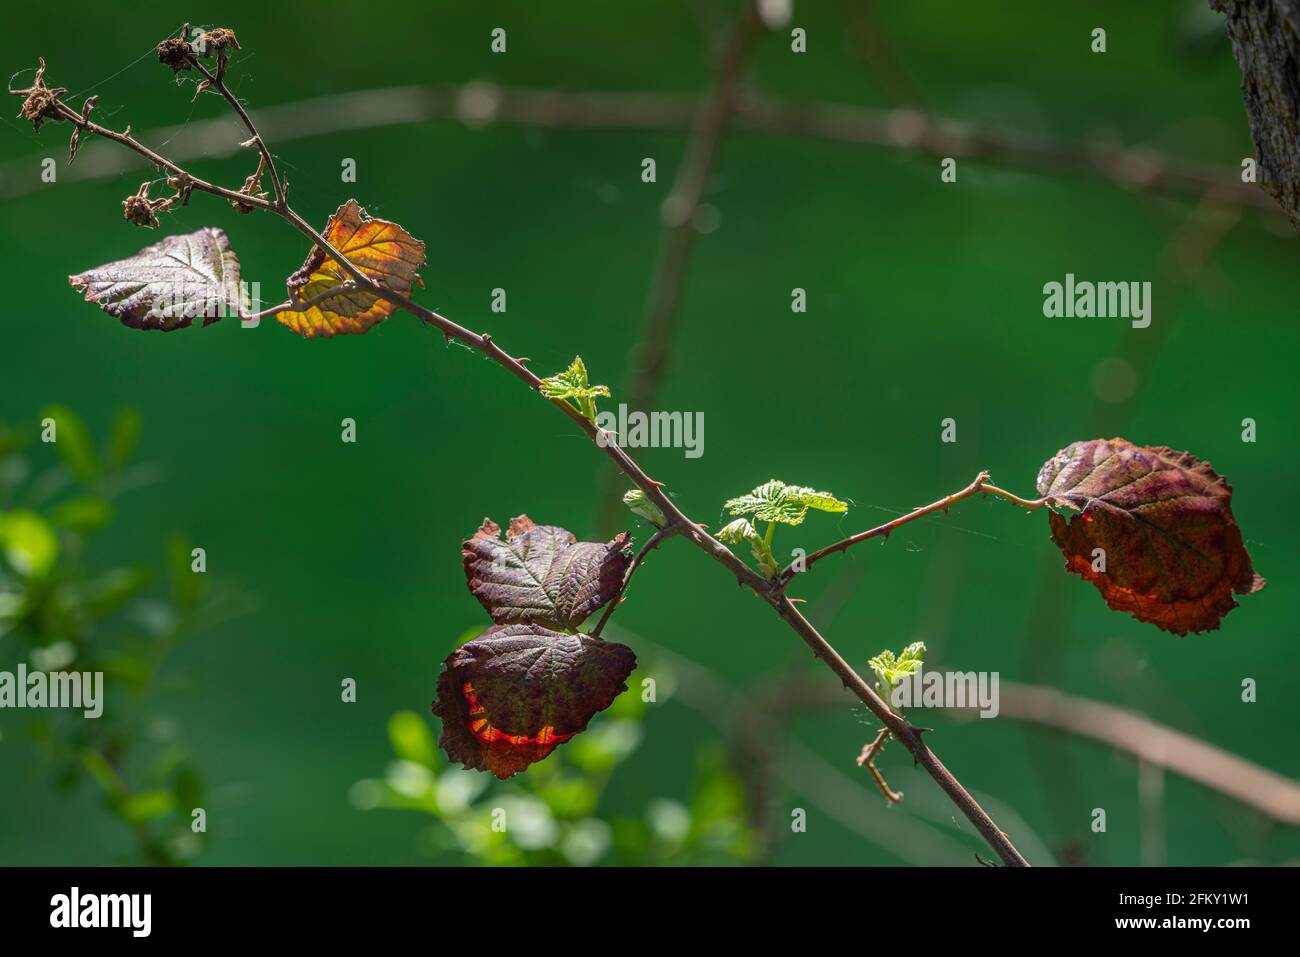 Bramble with old brown leaves and young green branches. Abruzzo, Italy, EUropa Stock Photo